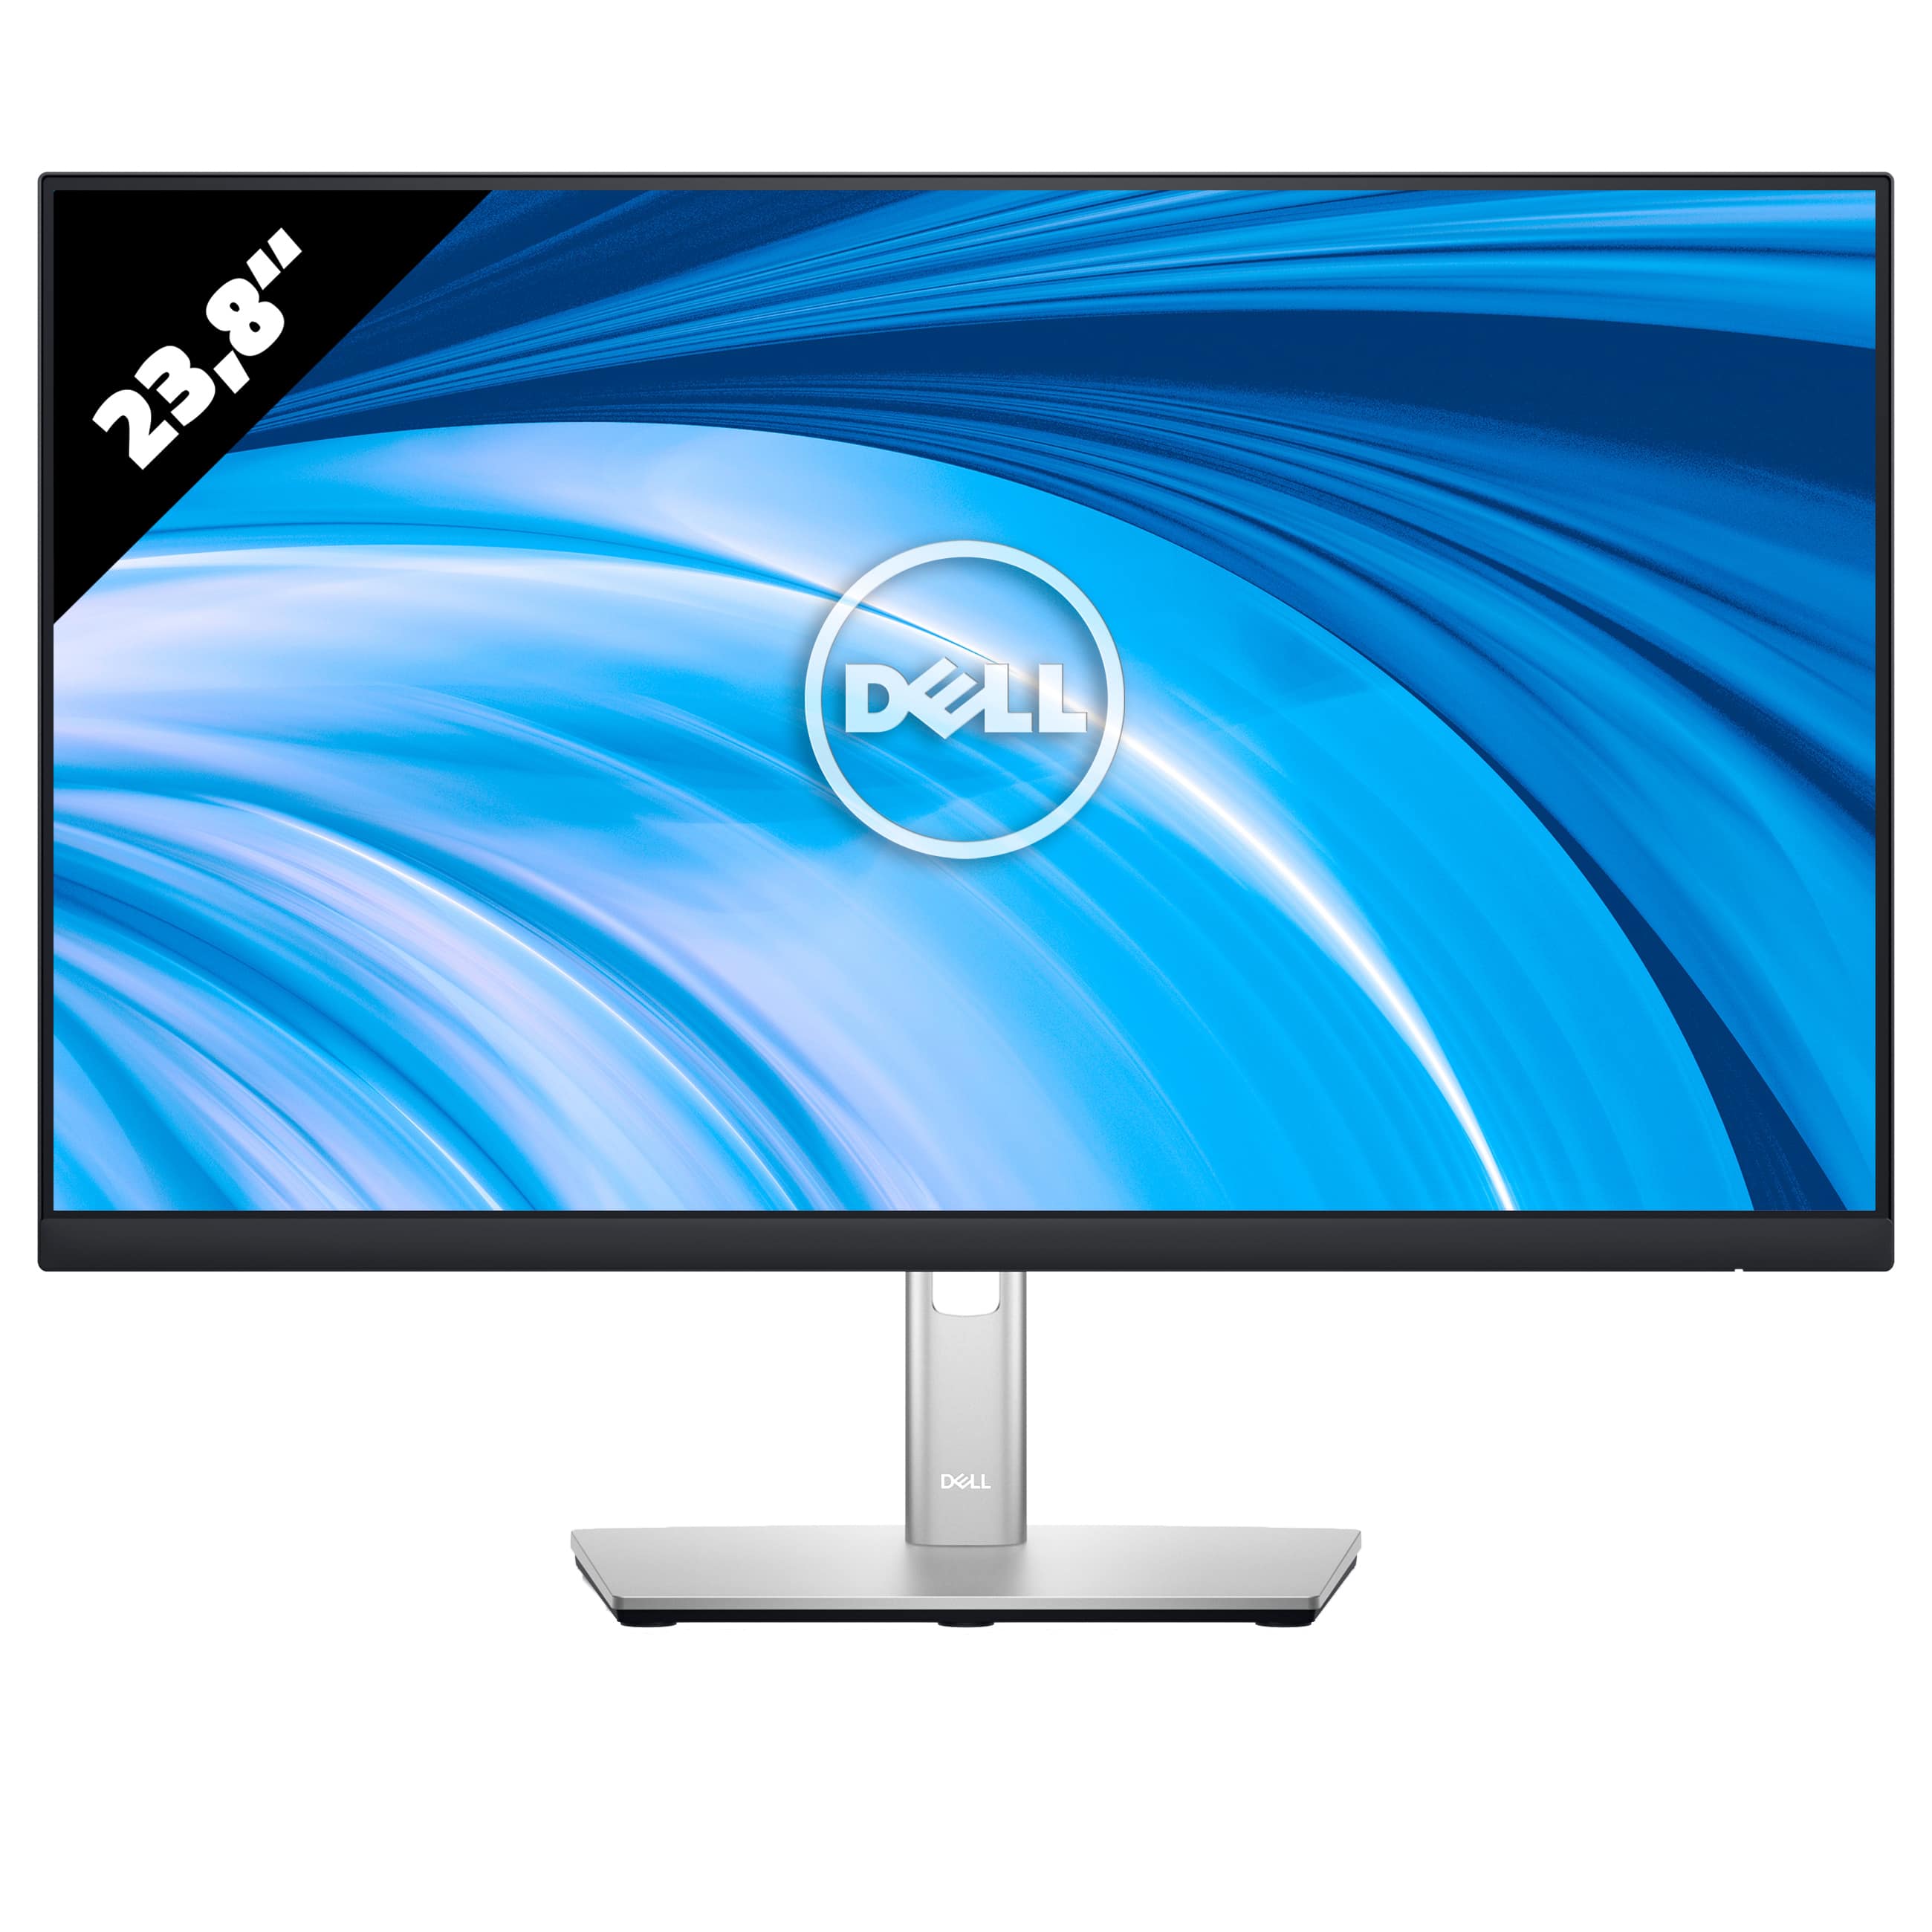 Dell Professional P2422HE - 1920 x 1080 - FHD - 23,8 Zoll - 5 ms - Schwarz